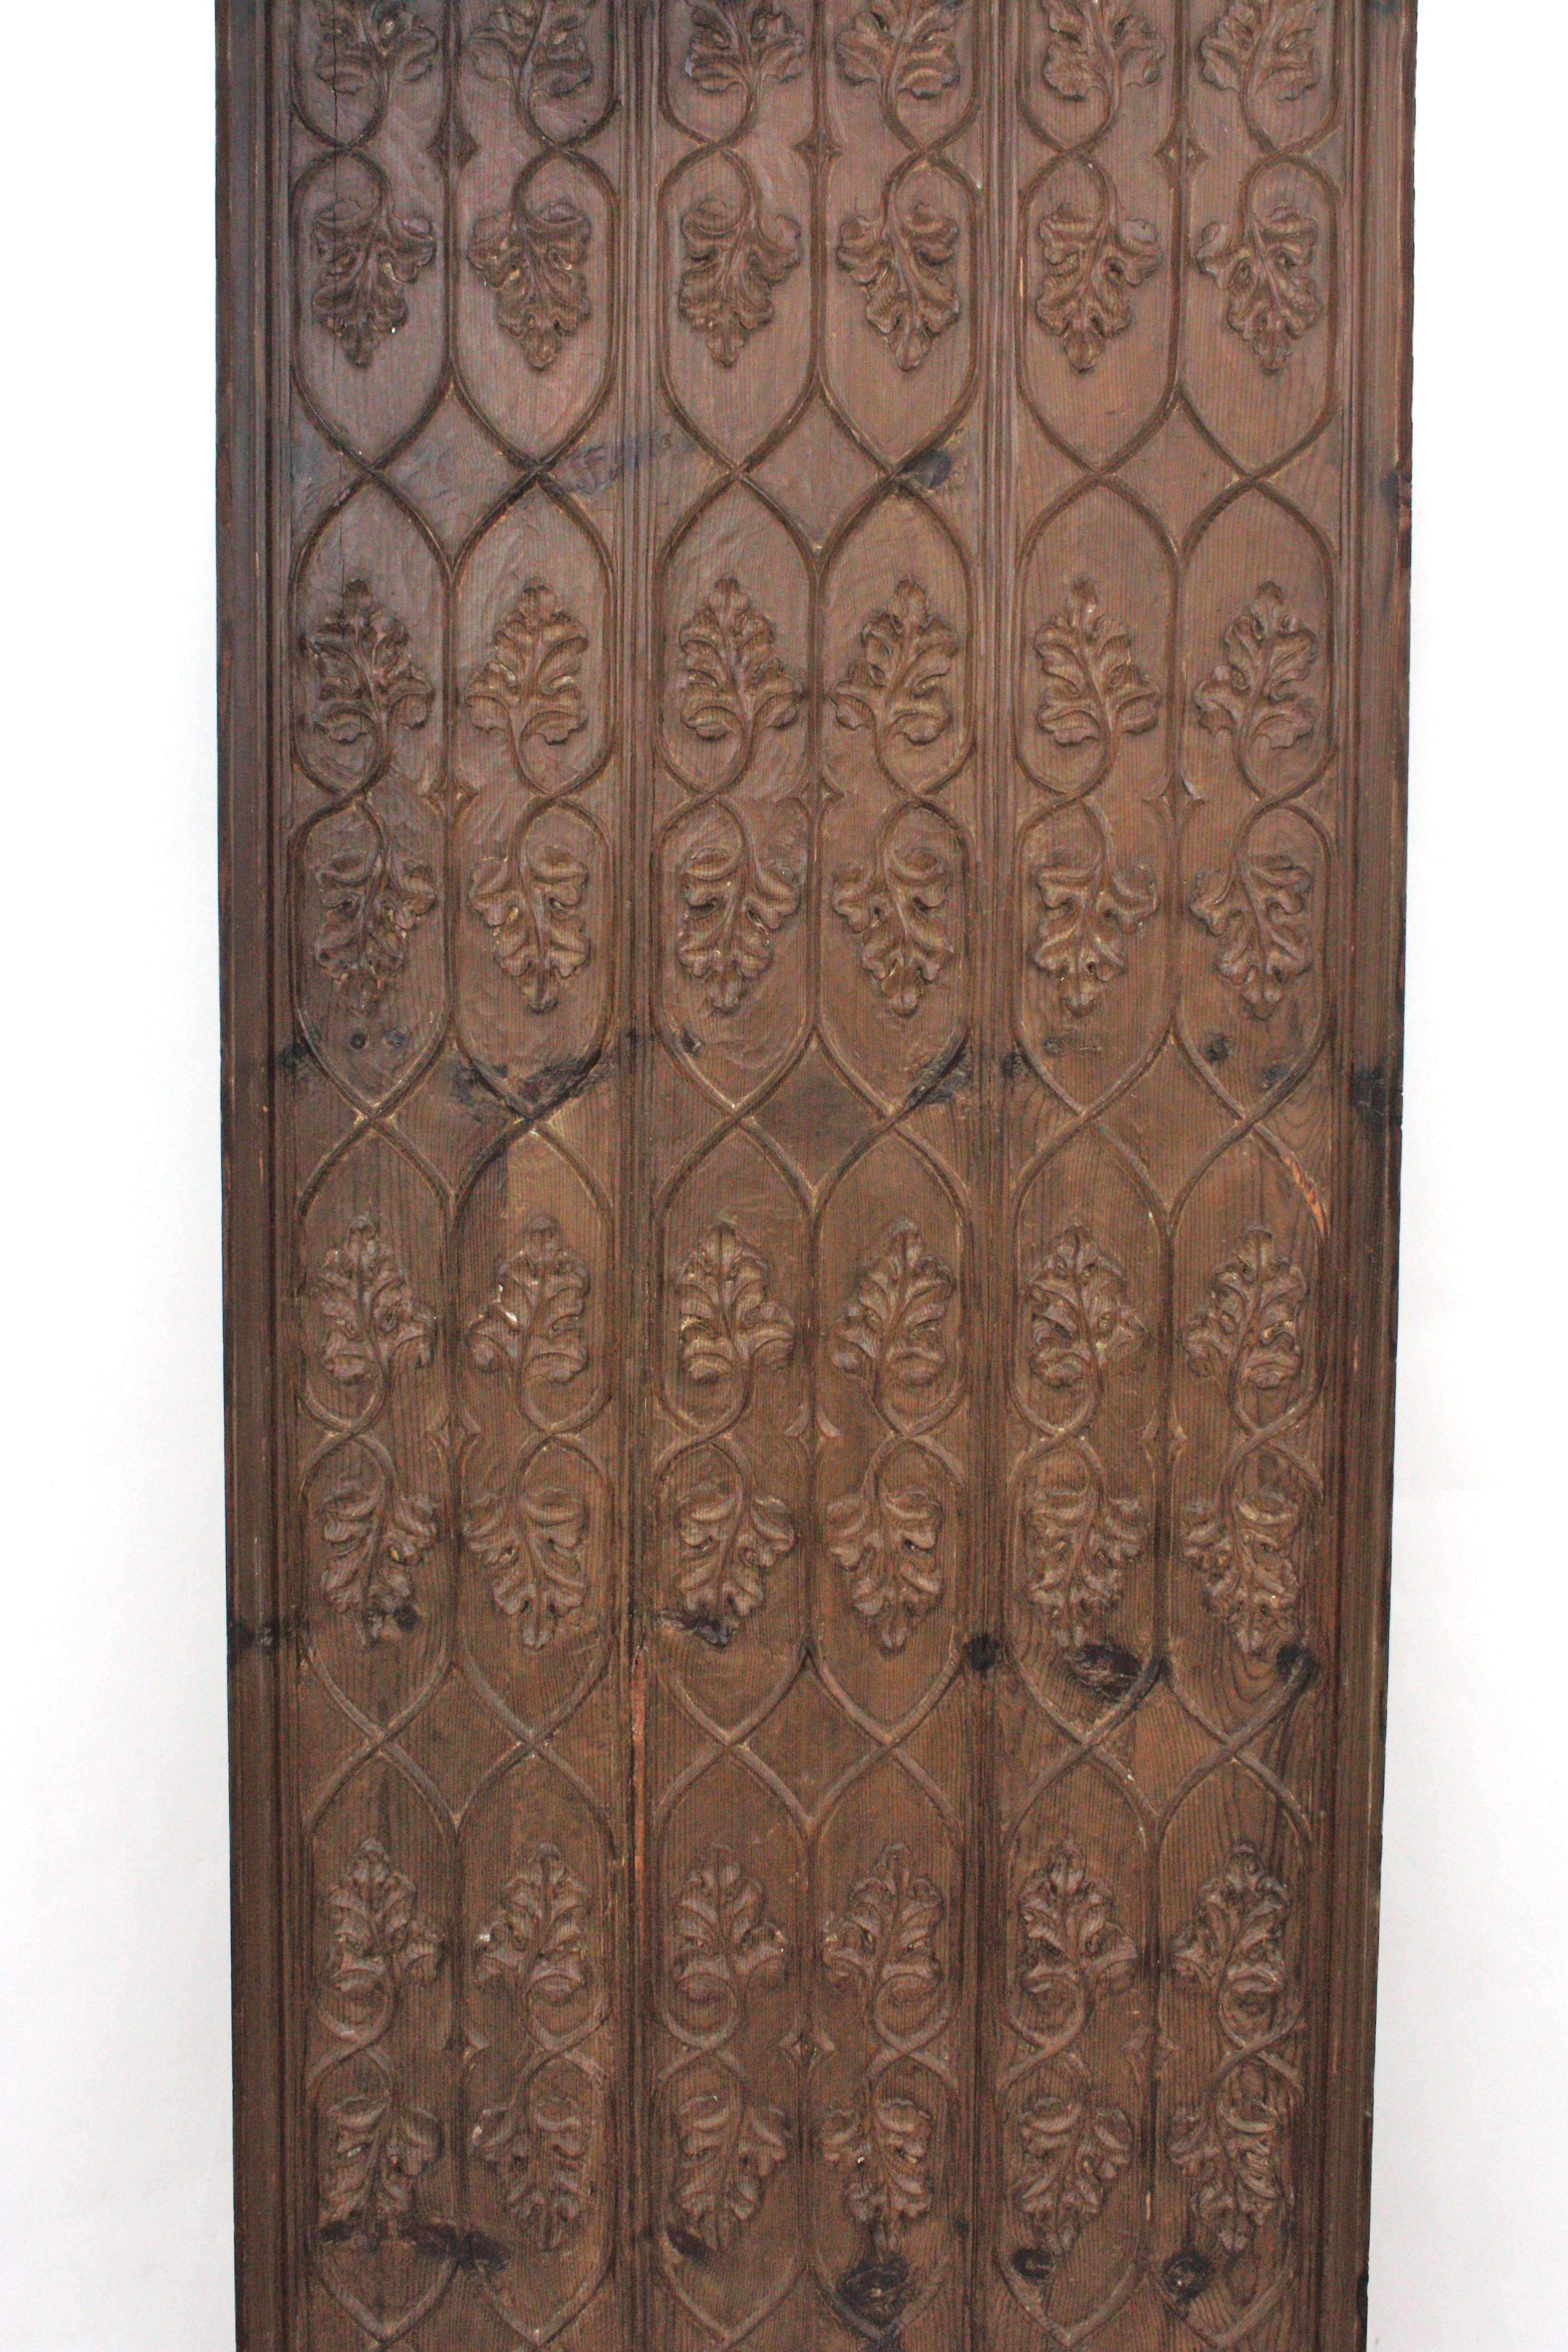 20th Century Spanish Hand-Carved Walnut Wood Decorative Wall Panel with Foliage Motifs For Sale